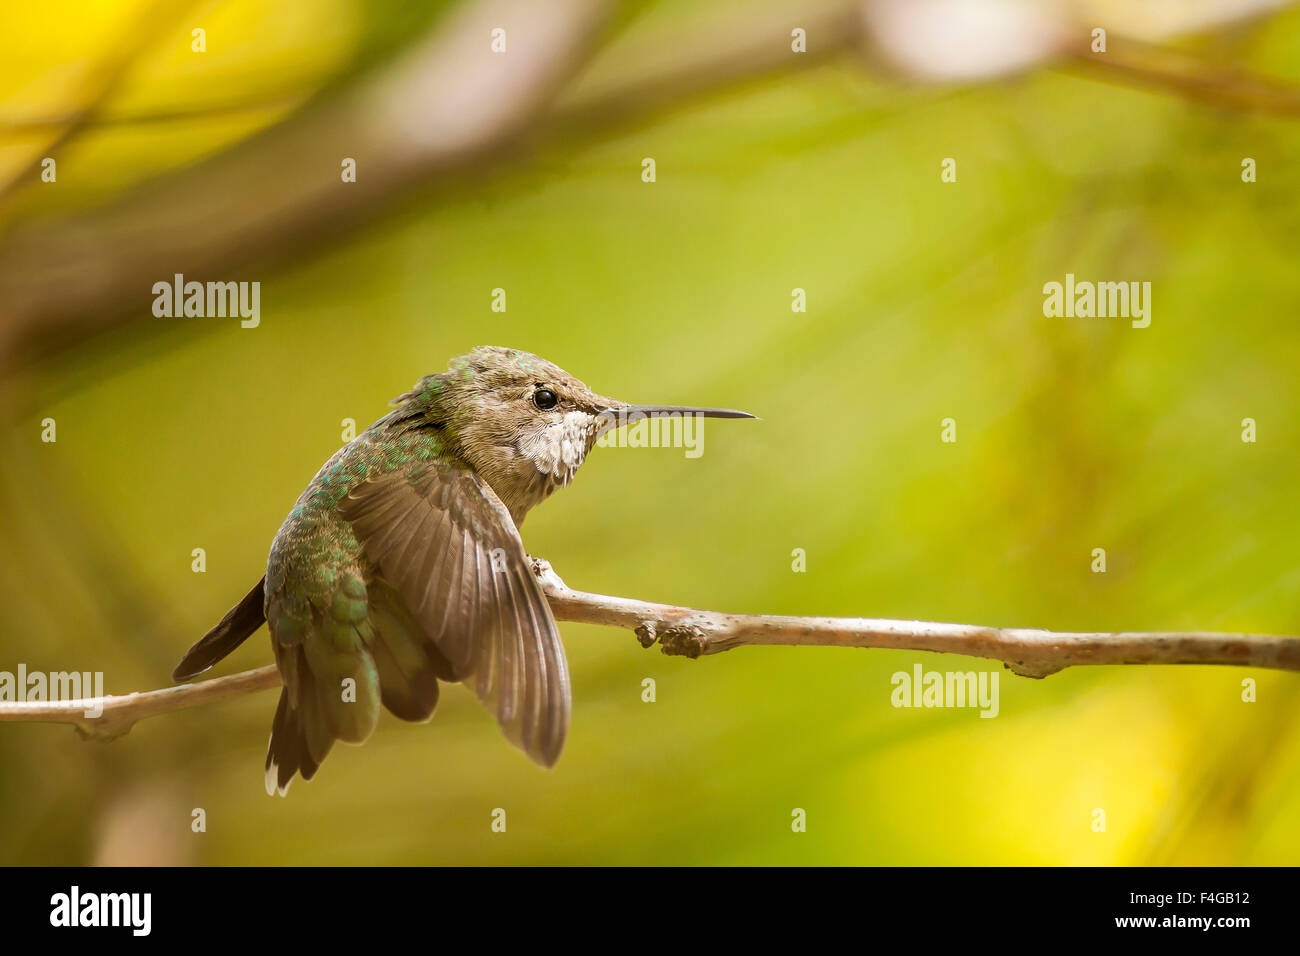 Anna's Hummingbird. At rest and perched. Stock Photo